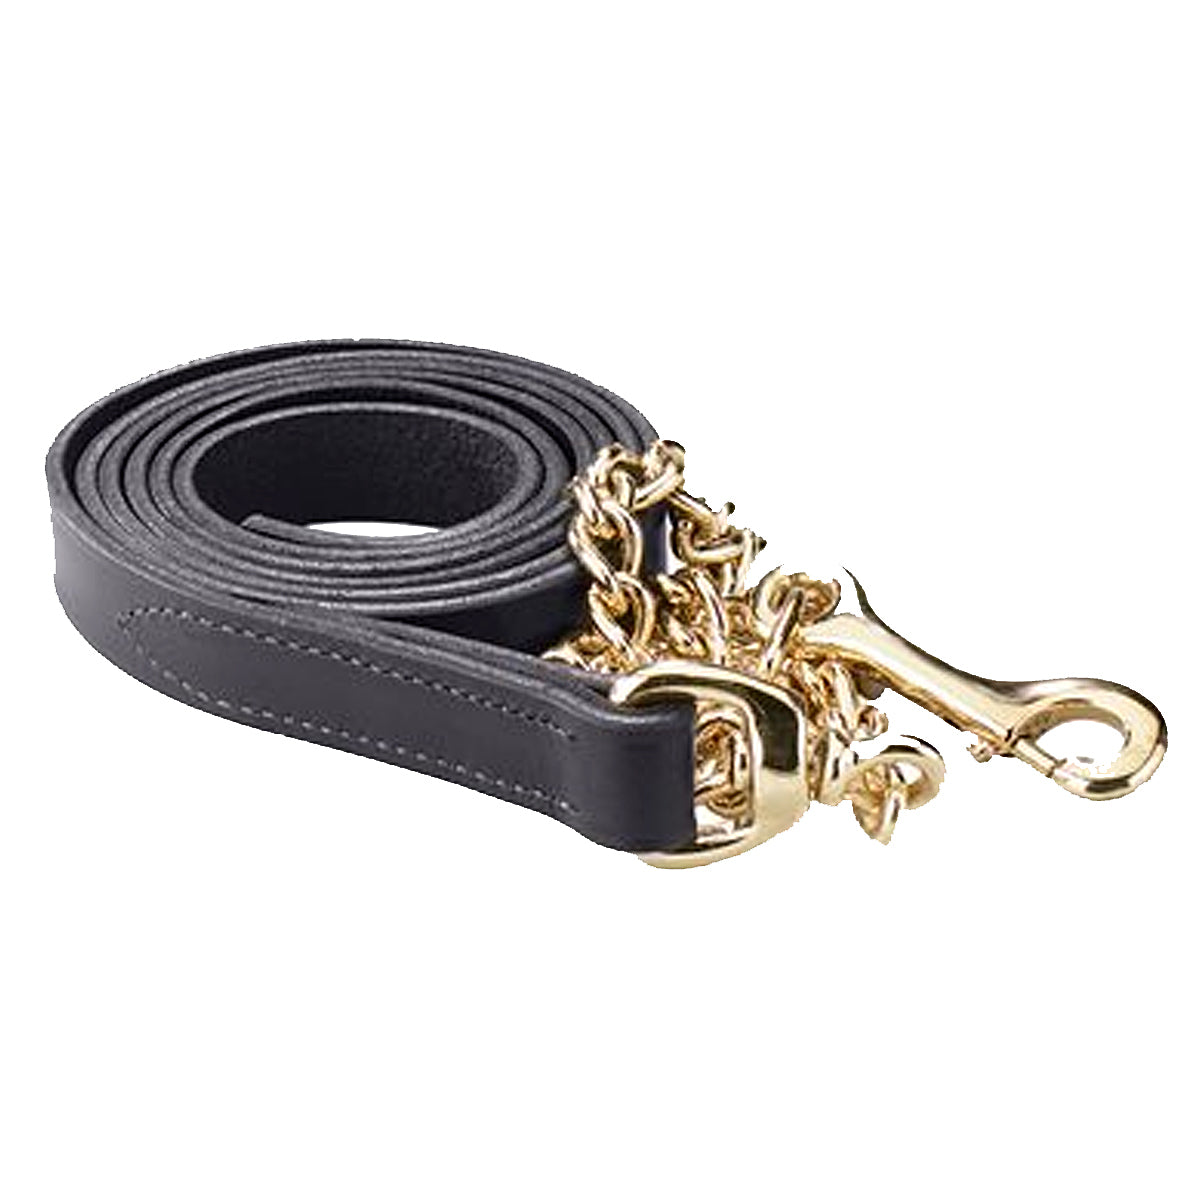 Perri's 1" Leather Lead with Chain